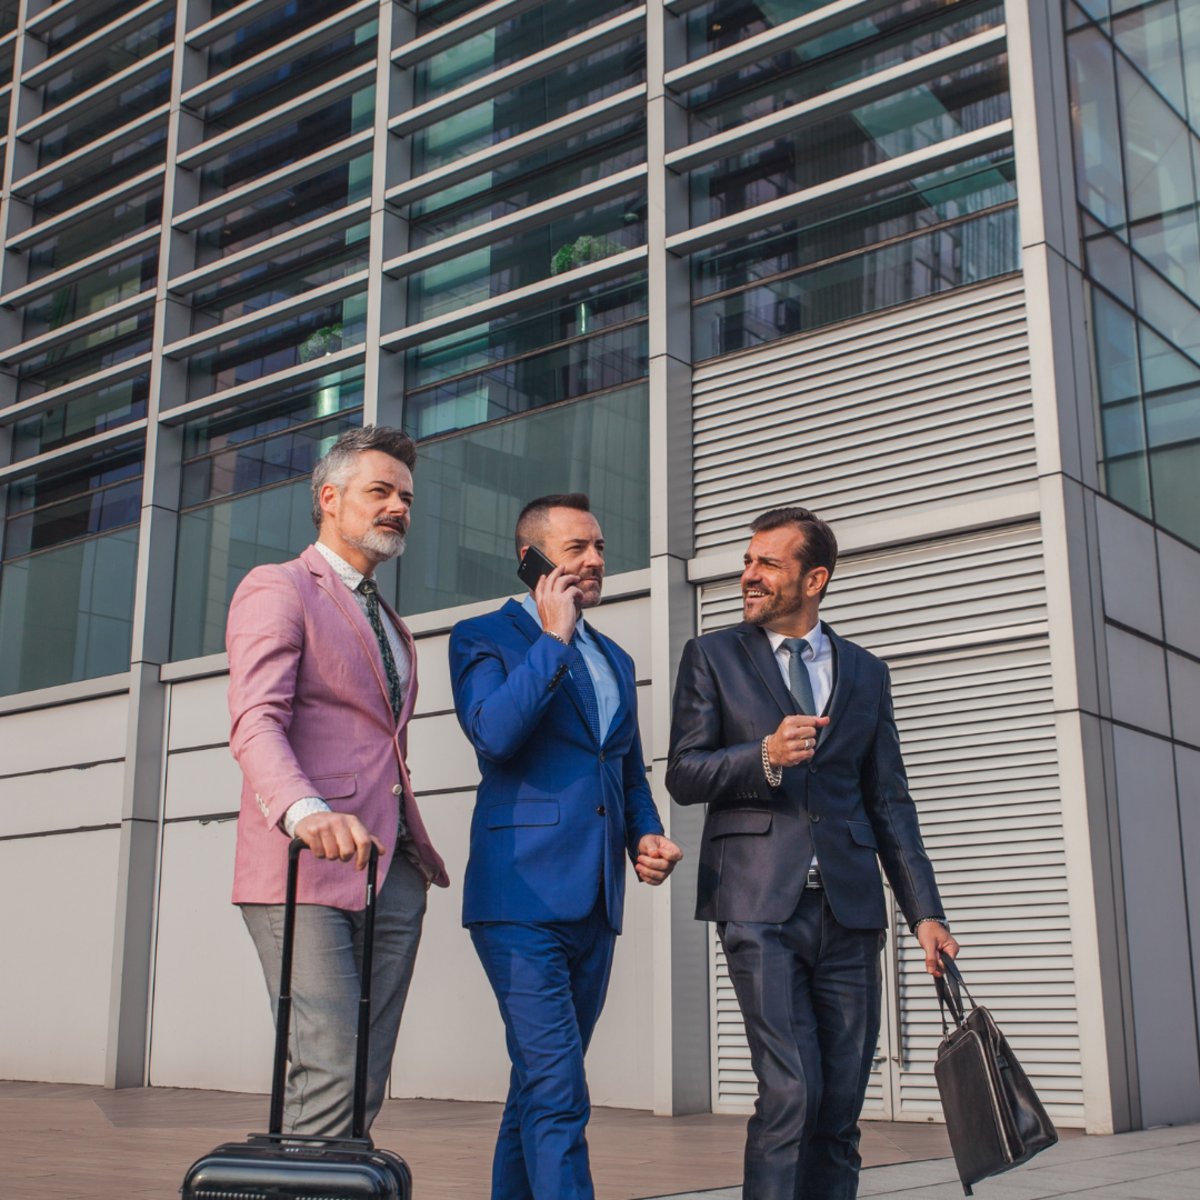 Welcome, business trailblazers! Touch down in Surprise and let the adventure begin. Unwind in style, conquer your meetings, and let us take care of the rest. Your success story starts with Windmill Suites Surprise! #businesstravel #corporatetravel